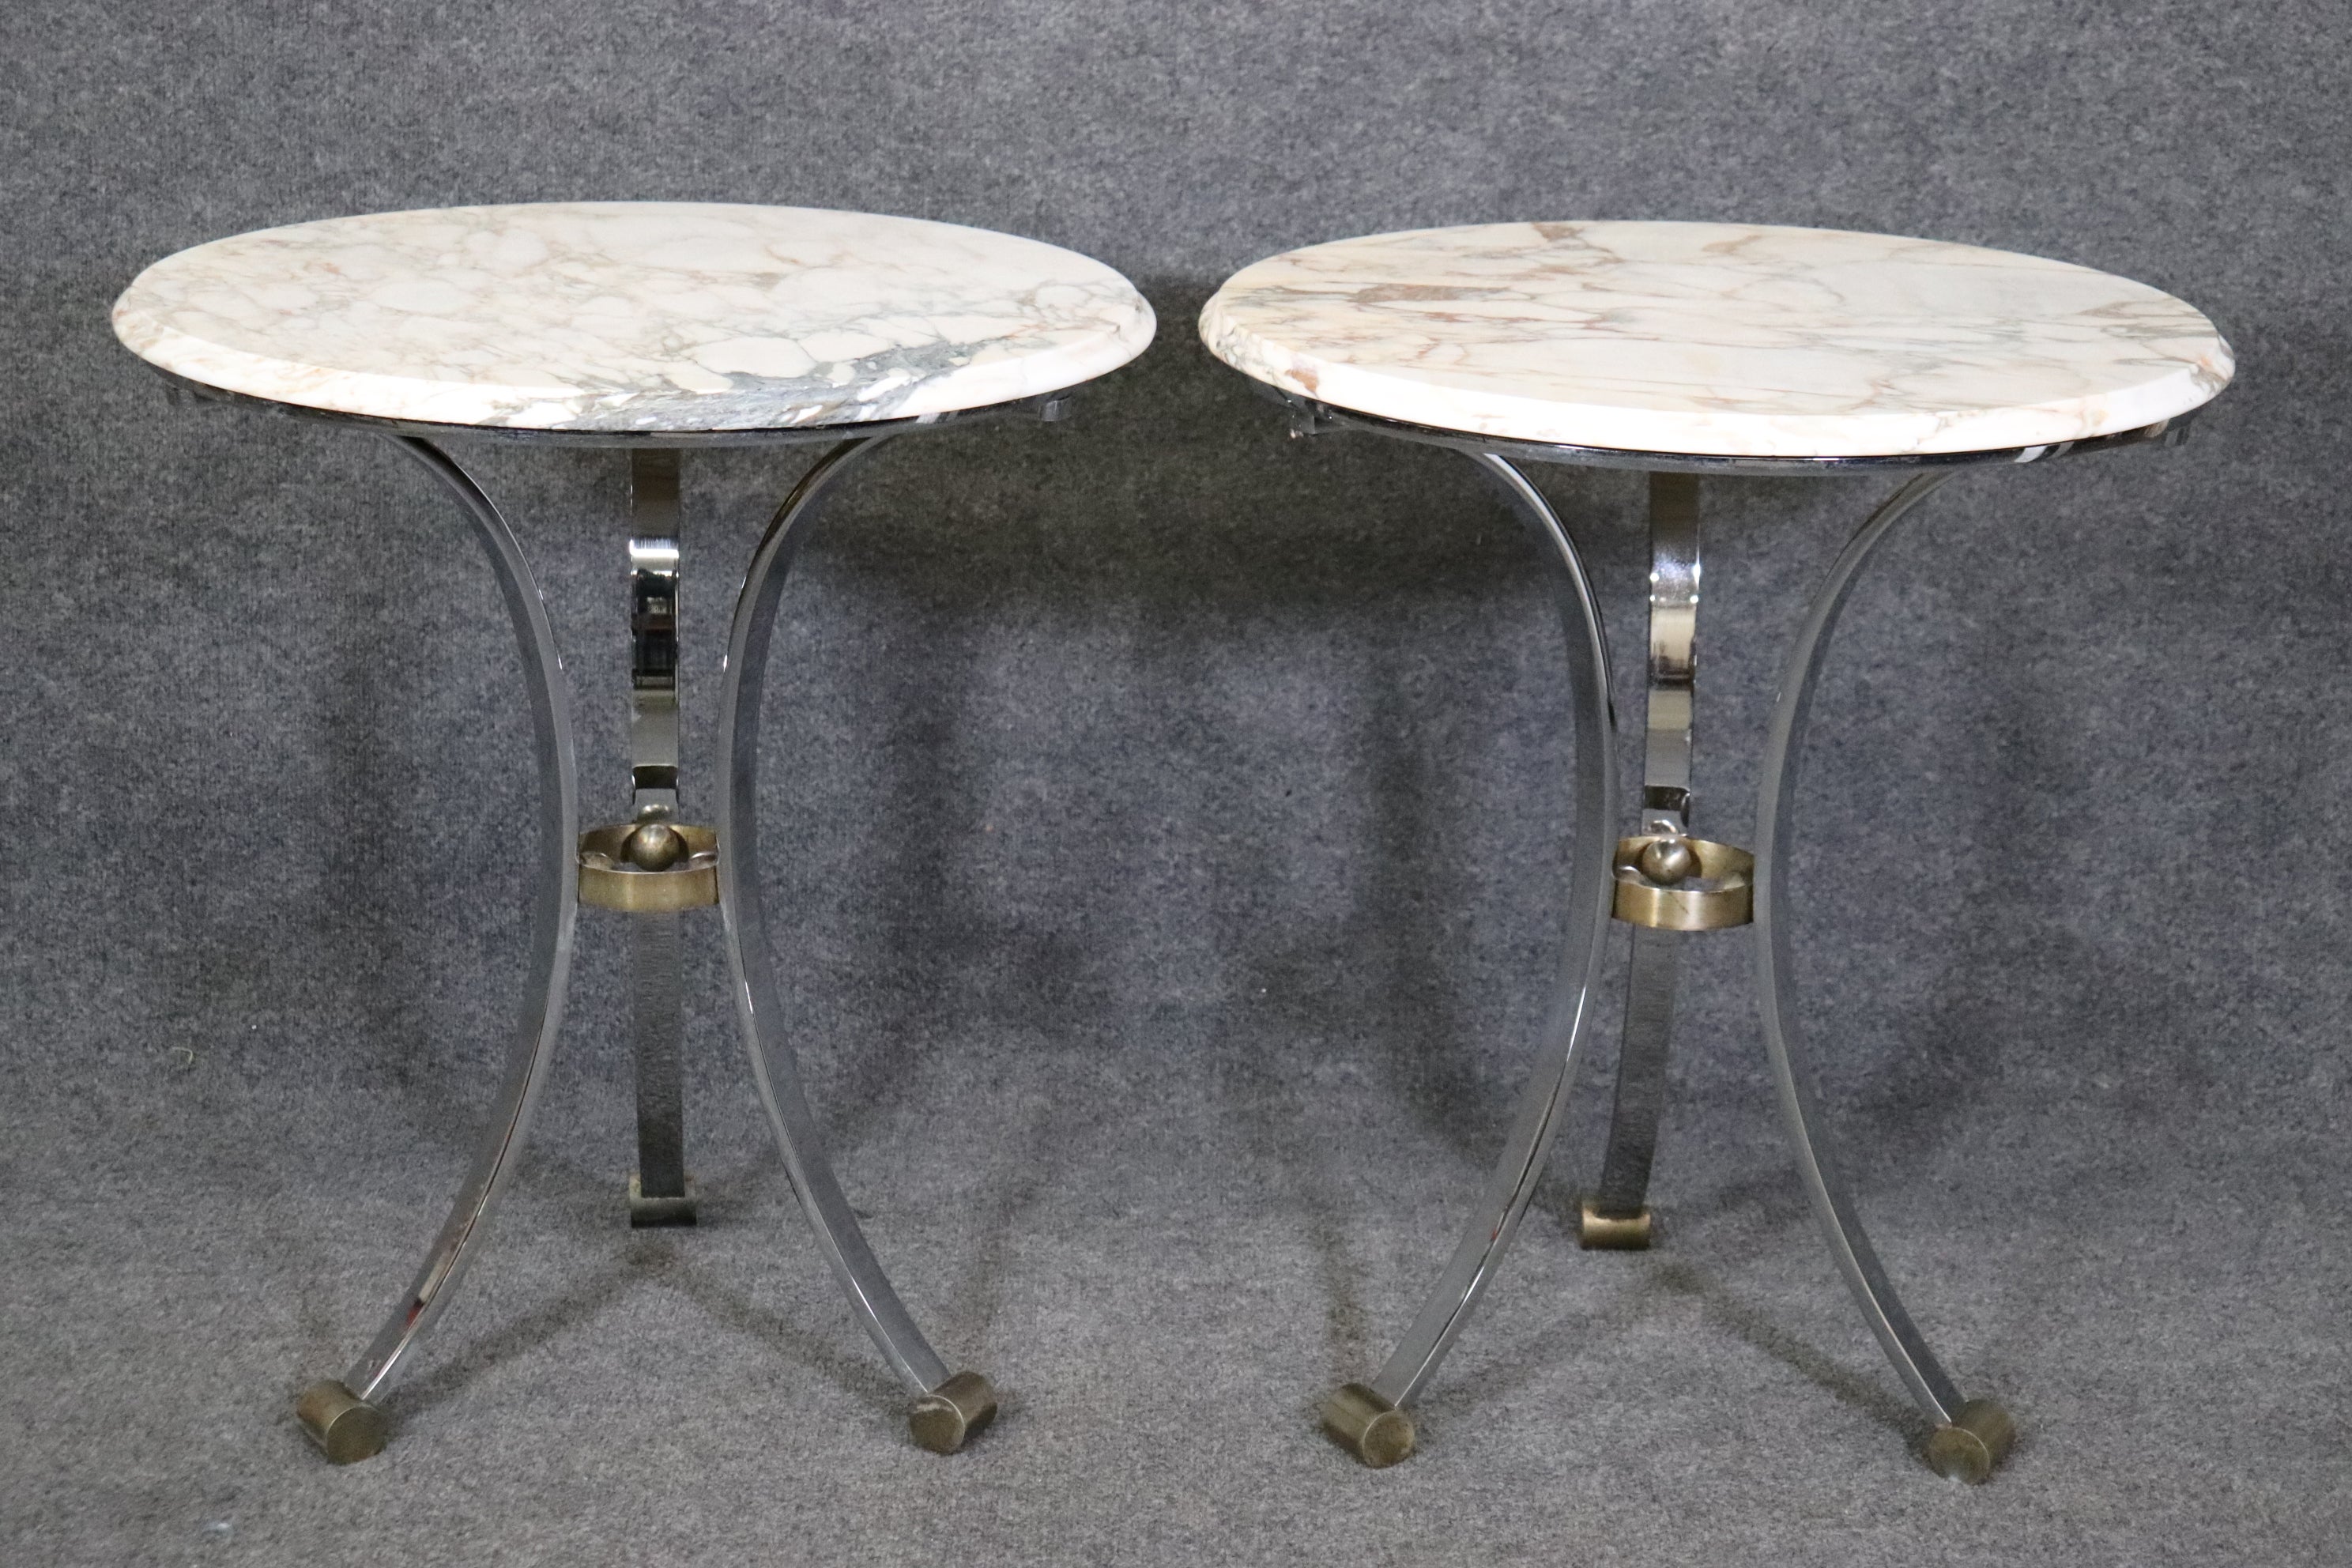 Dimensions- H: 27 1/2in W: 23 3/4in D: 23 3/4in 
This Pair of Maison Jansen Attributed Marble Top Gueridon Tables, End Tables have a minimalistic design but pack a big punch! This pair of Gueridons are made of the highest quality and are perfect